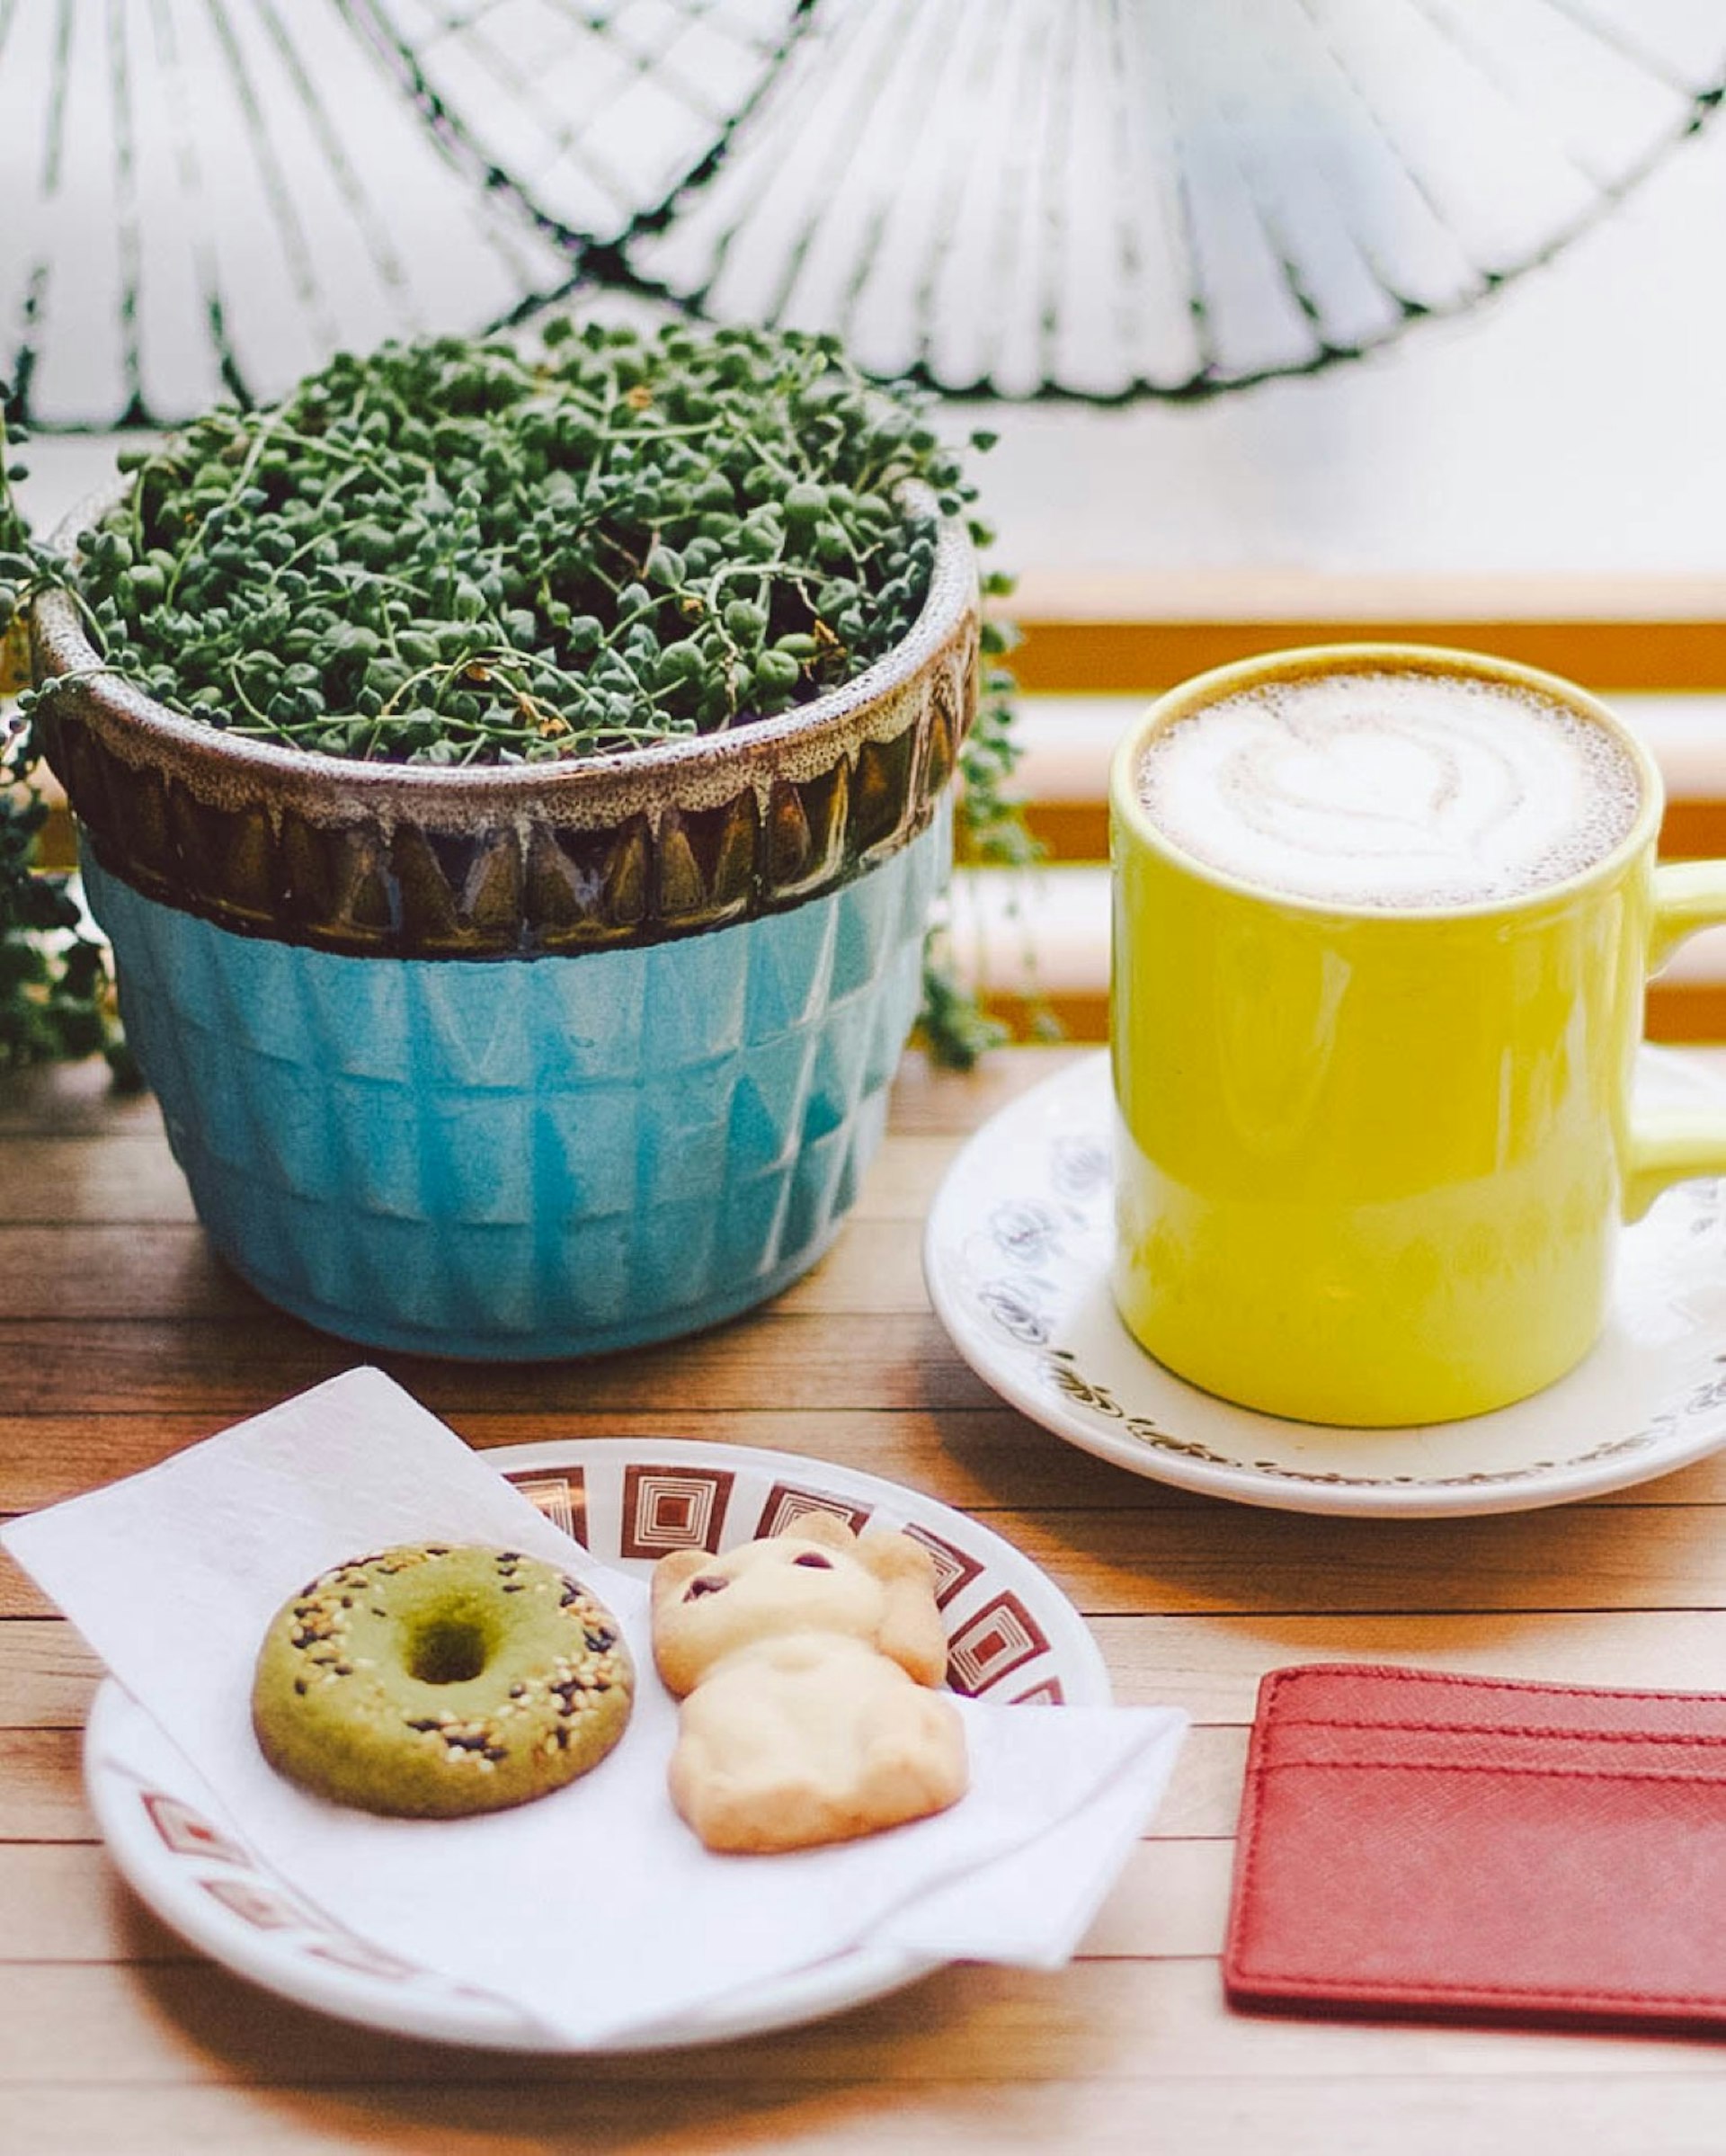 A yellow mug of coffee sits next to a potted plant and a small plate with two cookies on it © Jessica Lam / Lonely Planet